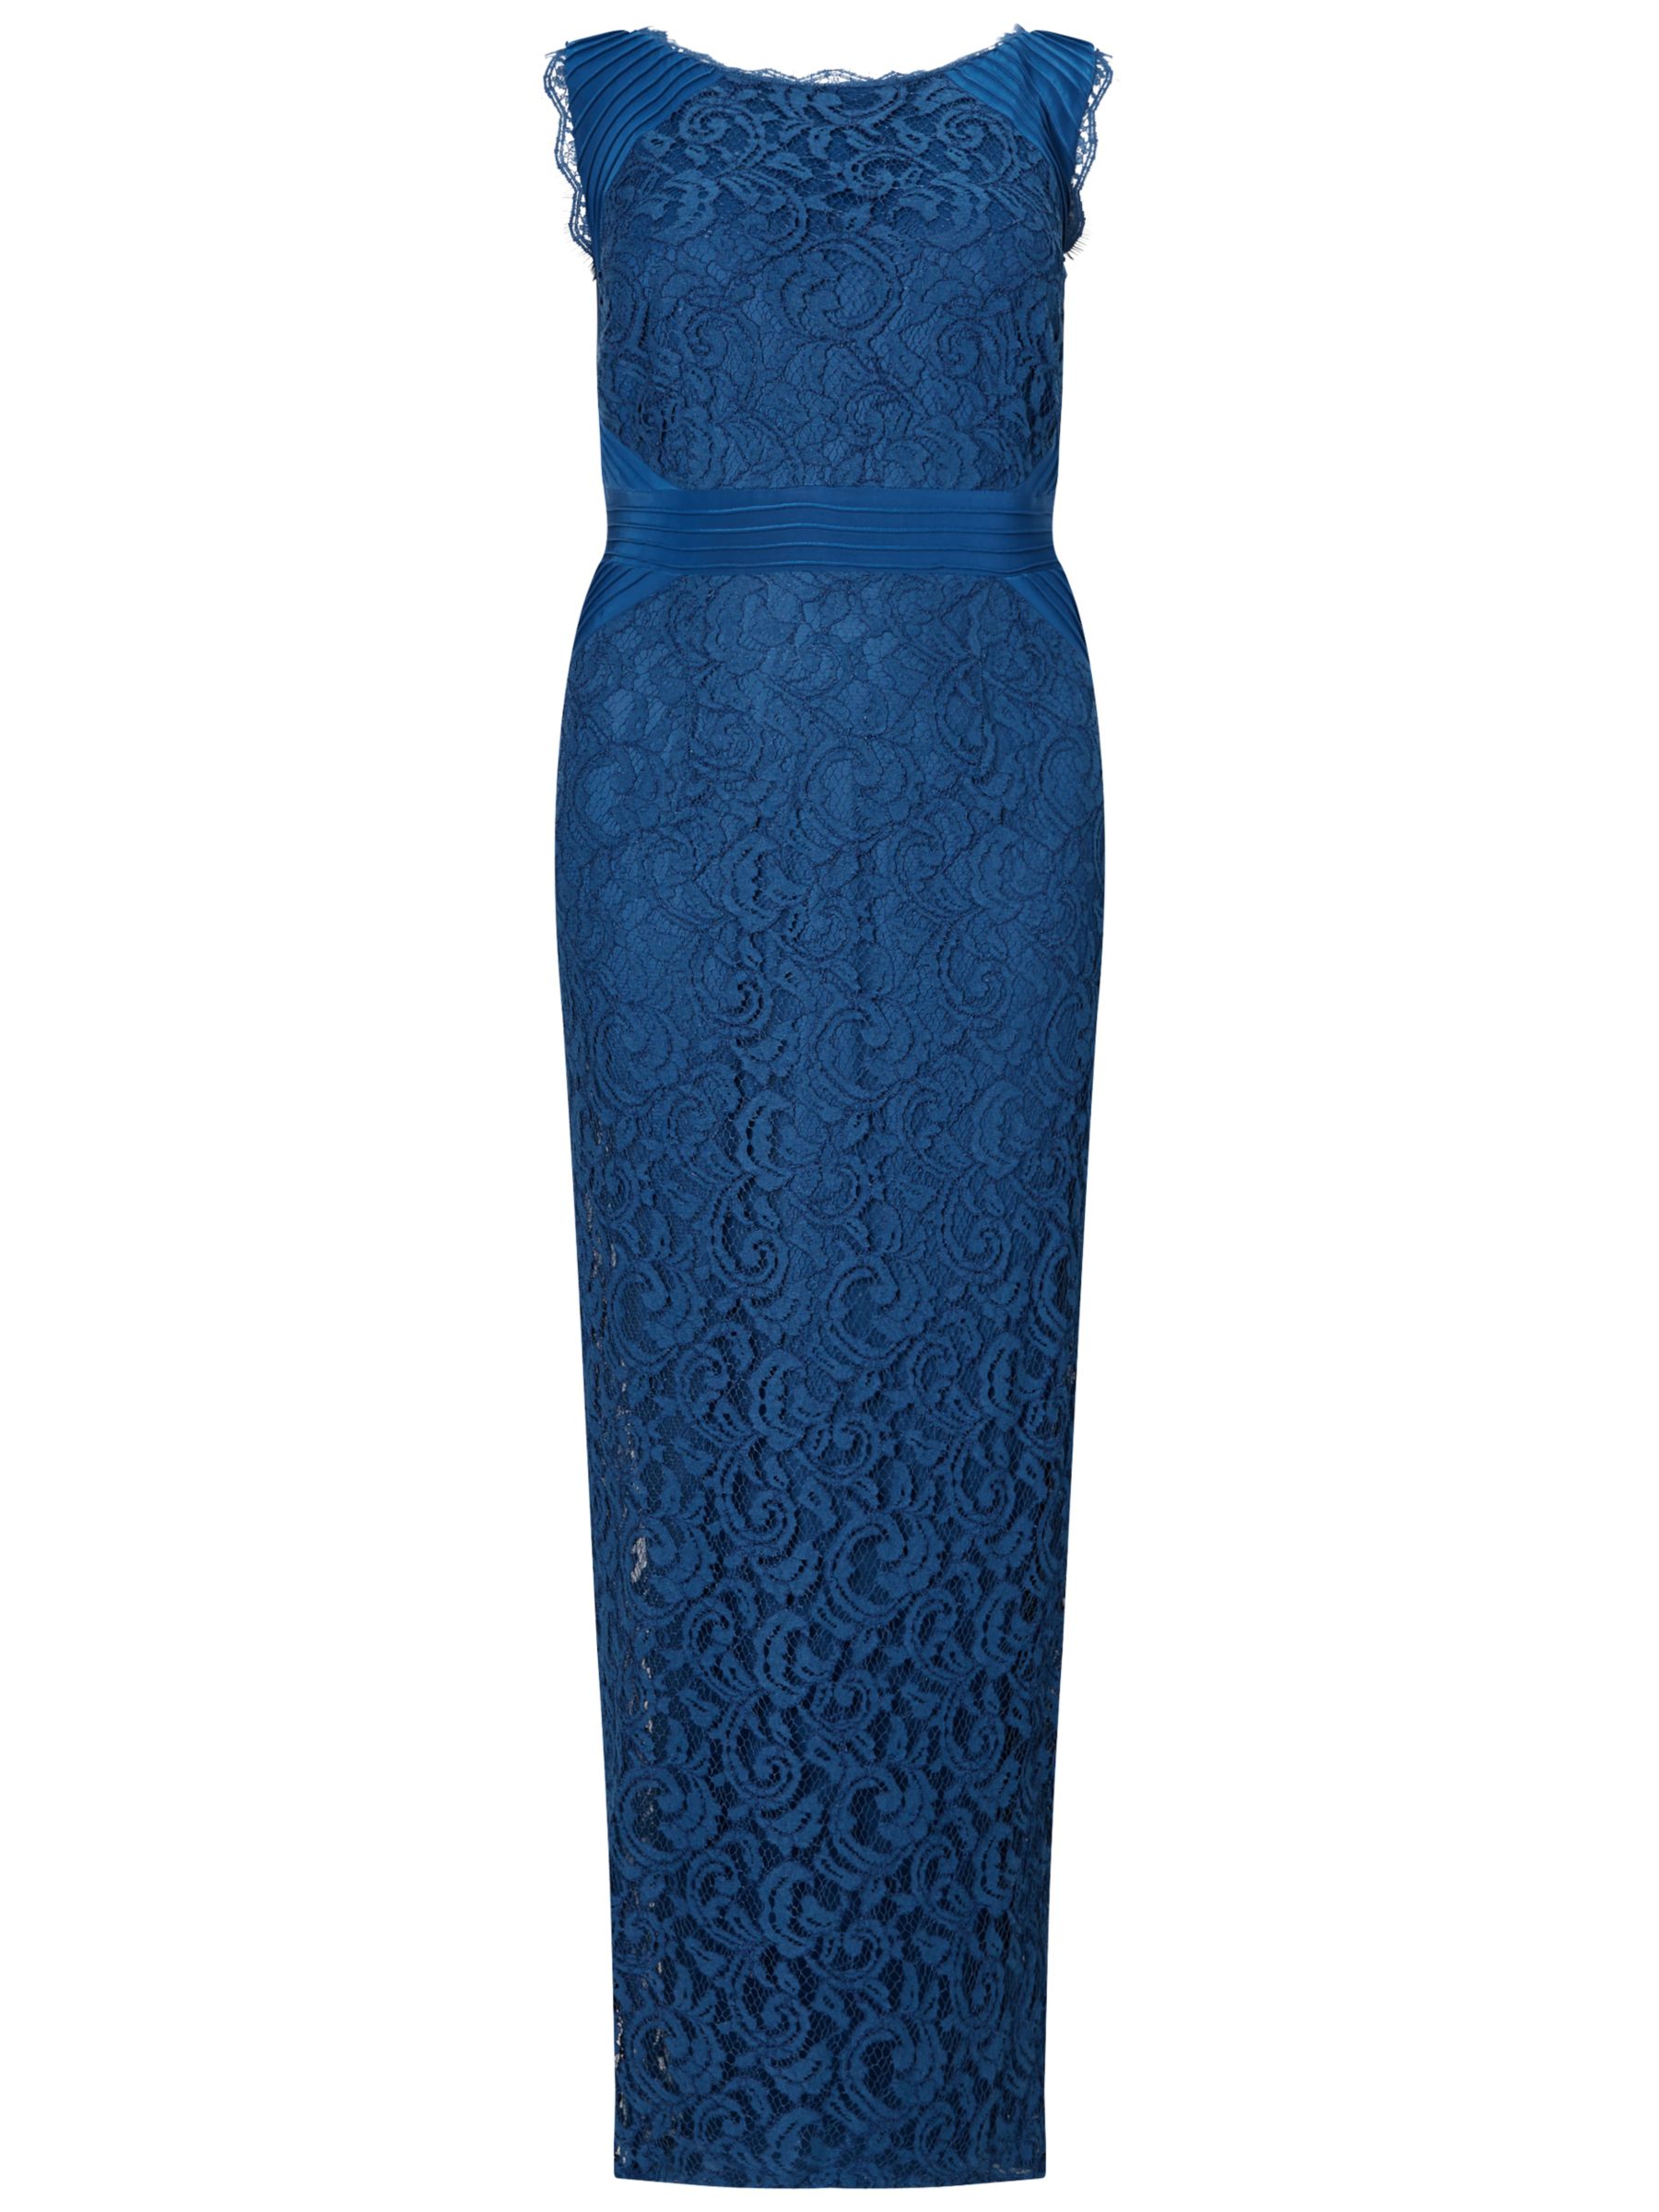 Adrianna Papell Plus Size Sleeveless Jersey And Lace Gown, Deep Blue